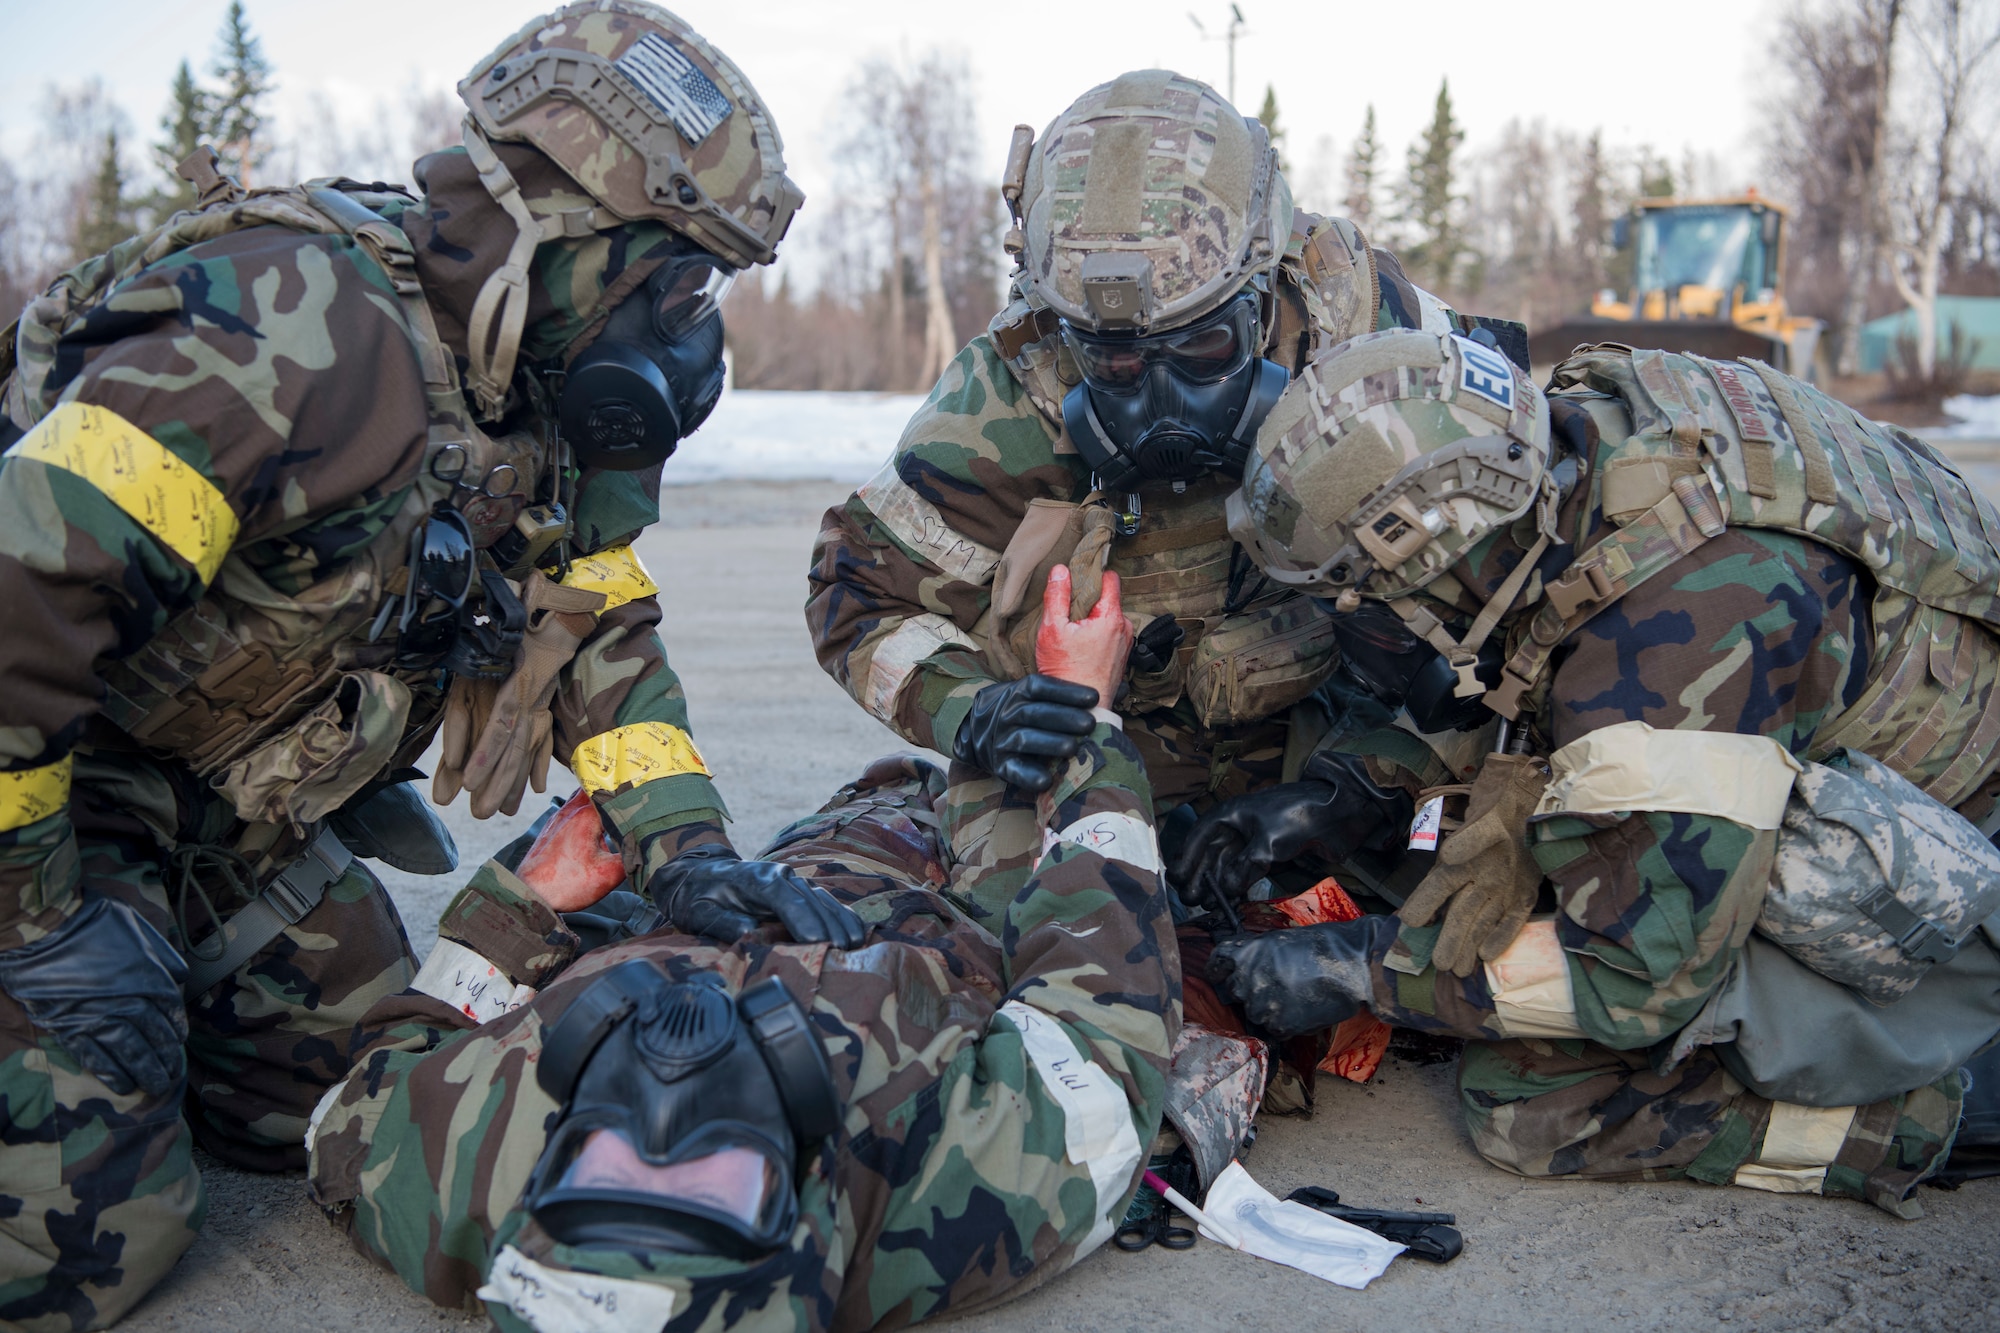 Explosive Ordnance Disposal Airmen conduct self-aide buddy care in a simulated chemical environment during Polar Force 19-4 at Joint Base Elmendorf-Richardson, Alaska, April 4, 2019. Polar Force is a two-week exercise designed to test JBER’s mission readiness and strengthen and develop the skills service members require when facing adverse situations.